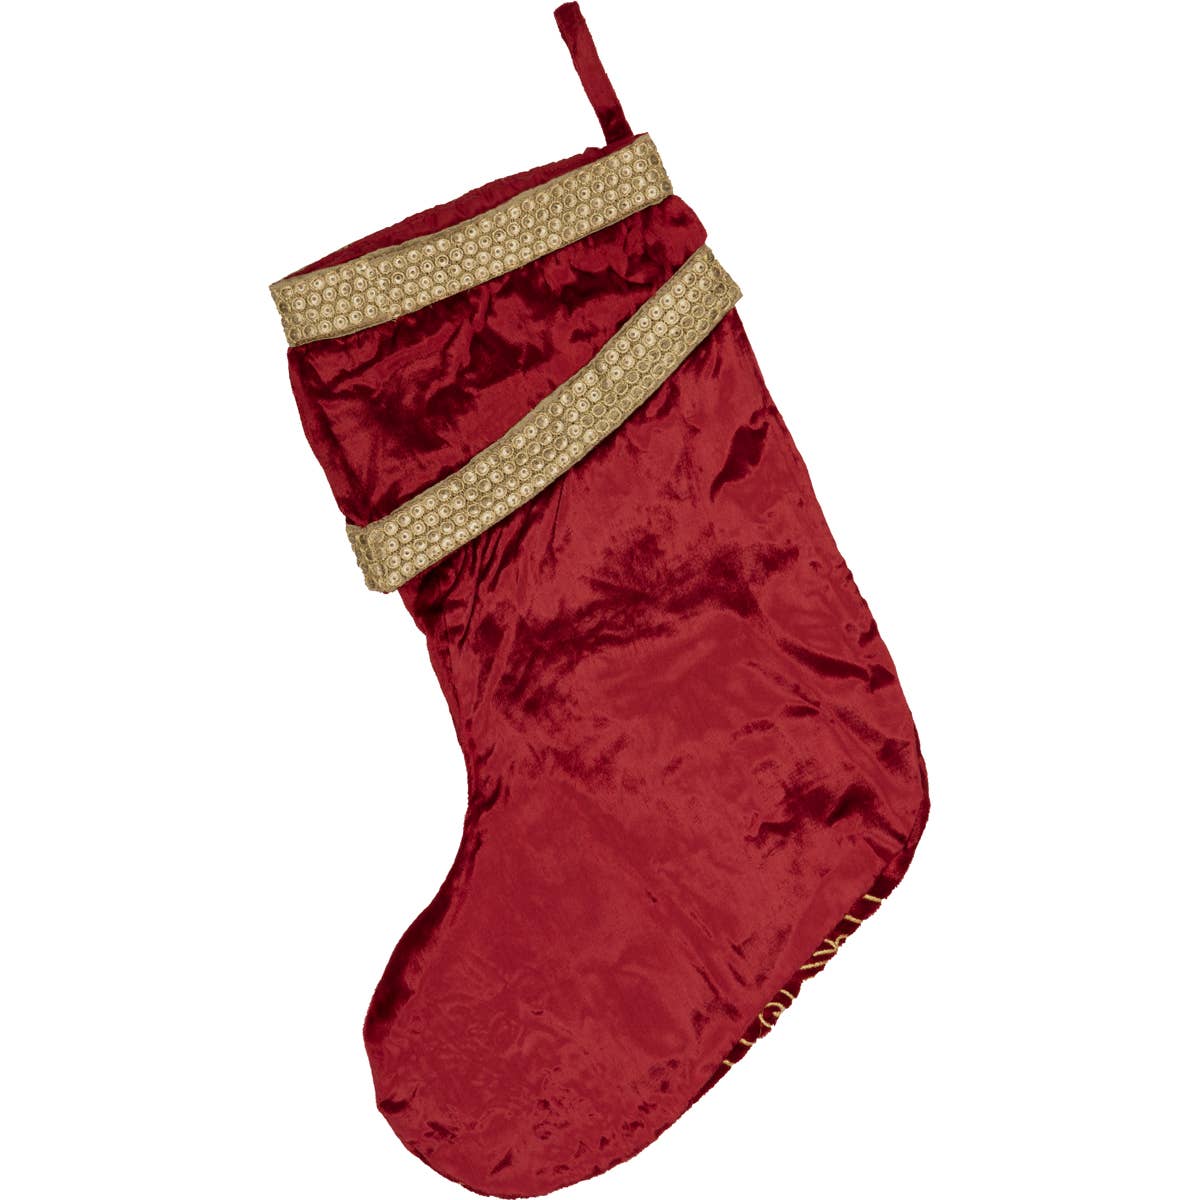 Yule Stocking - Rhapsody and Renascence